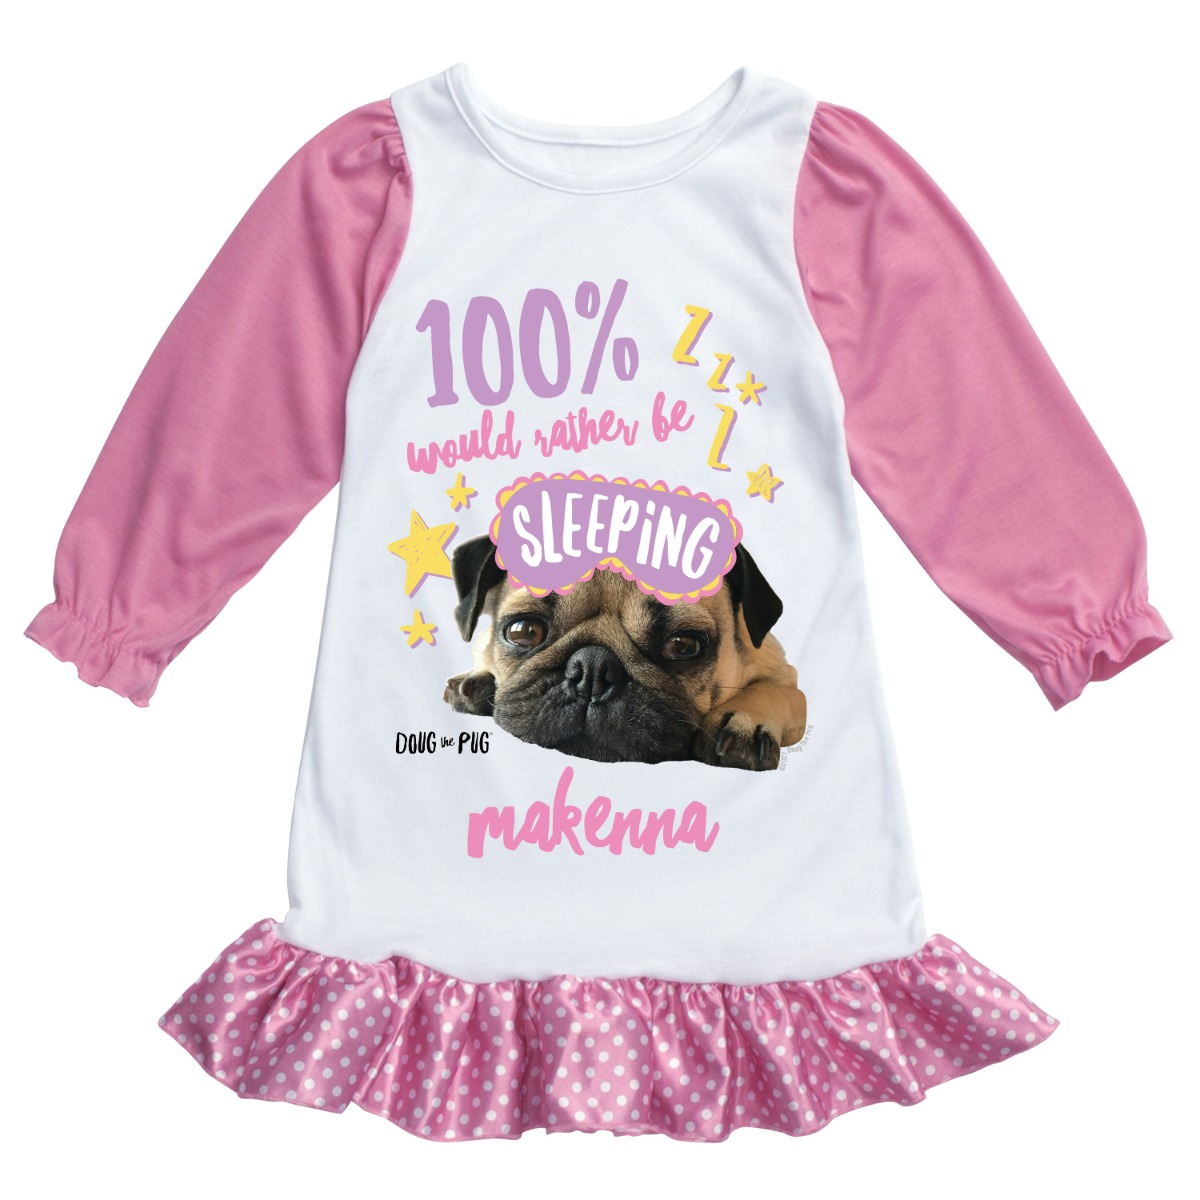 Doug The Pug Would Rather Be Sleeping Personalized Nightgown